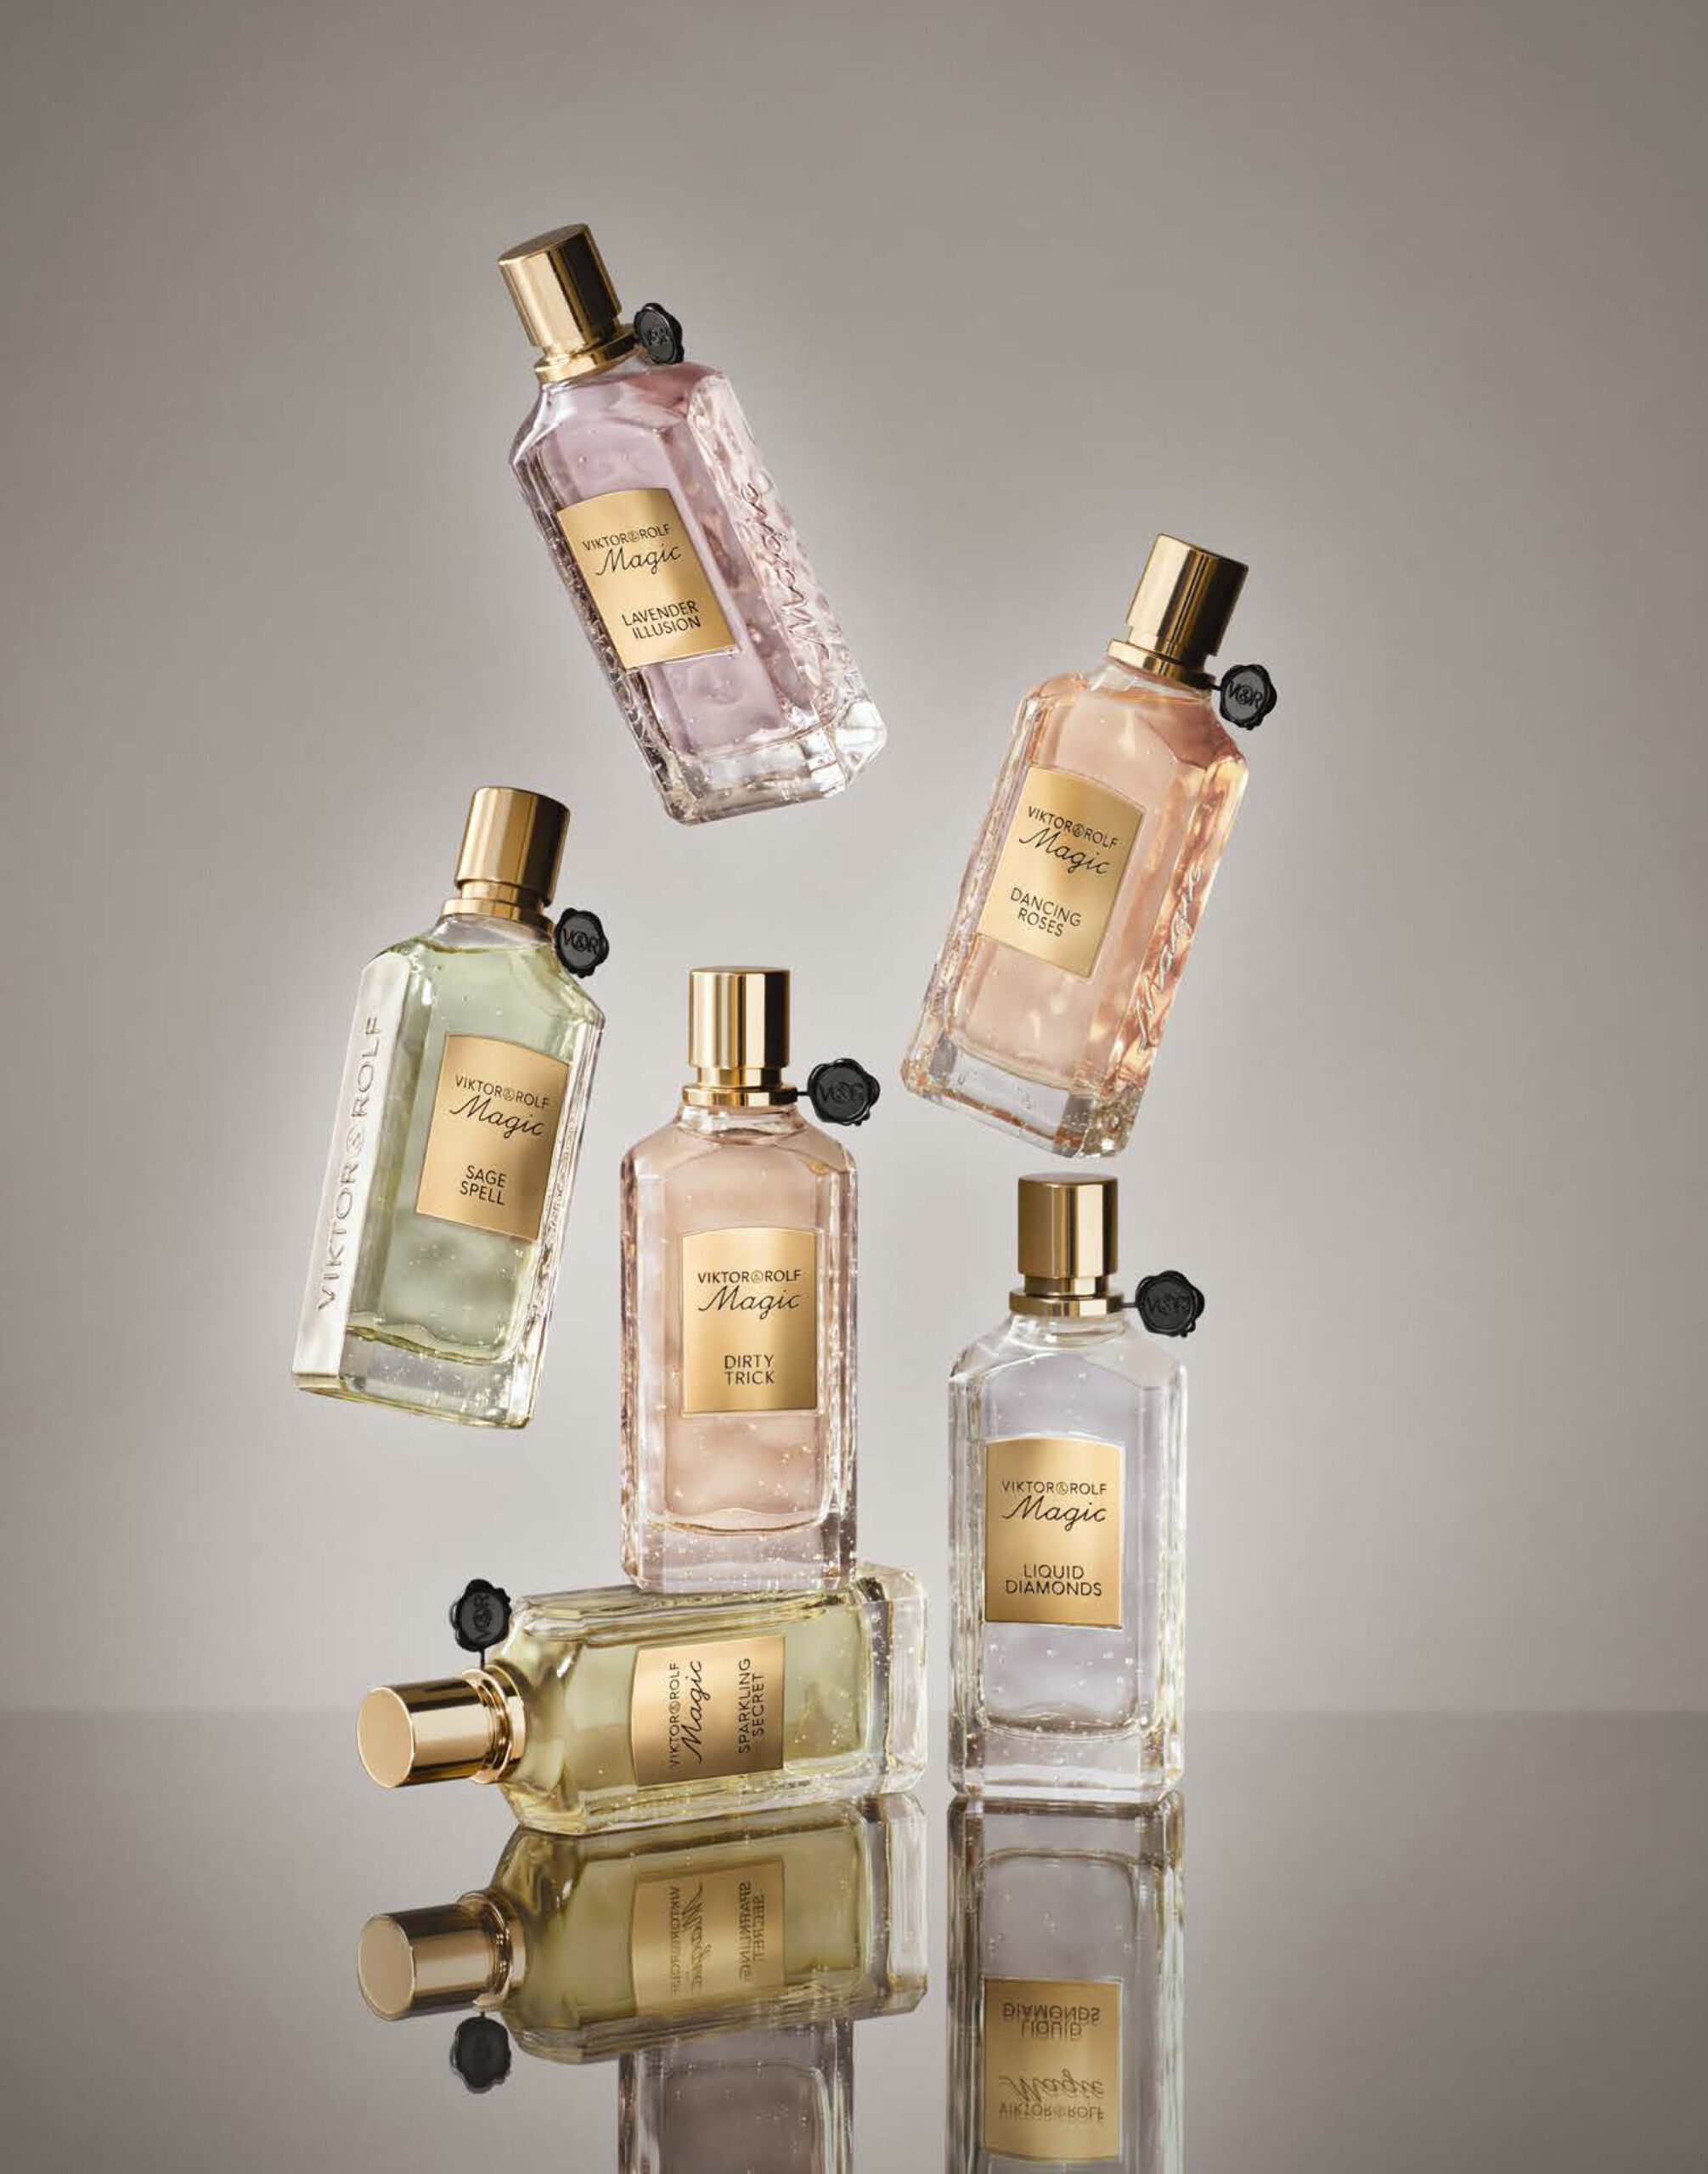 Casting a spell: 'Magic' and 'Viktor & Rolf' are glass-embossed down the sides of the ‘magic potions’ 